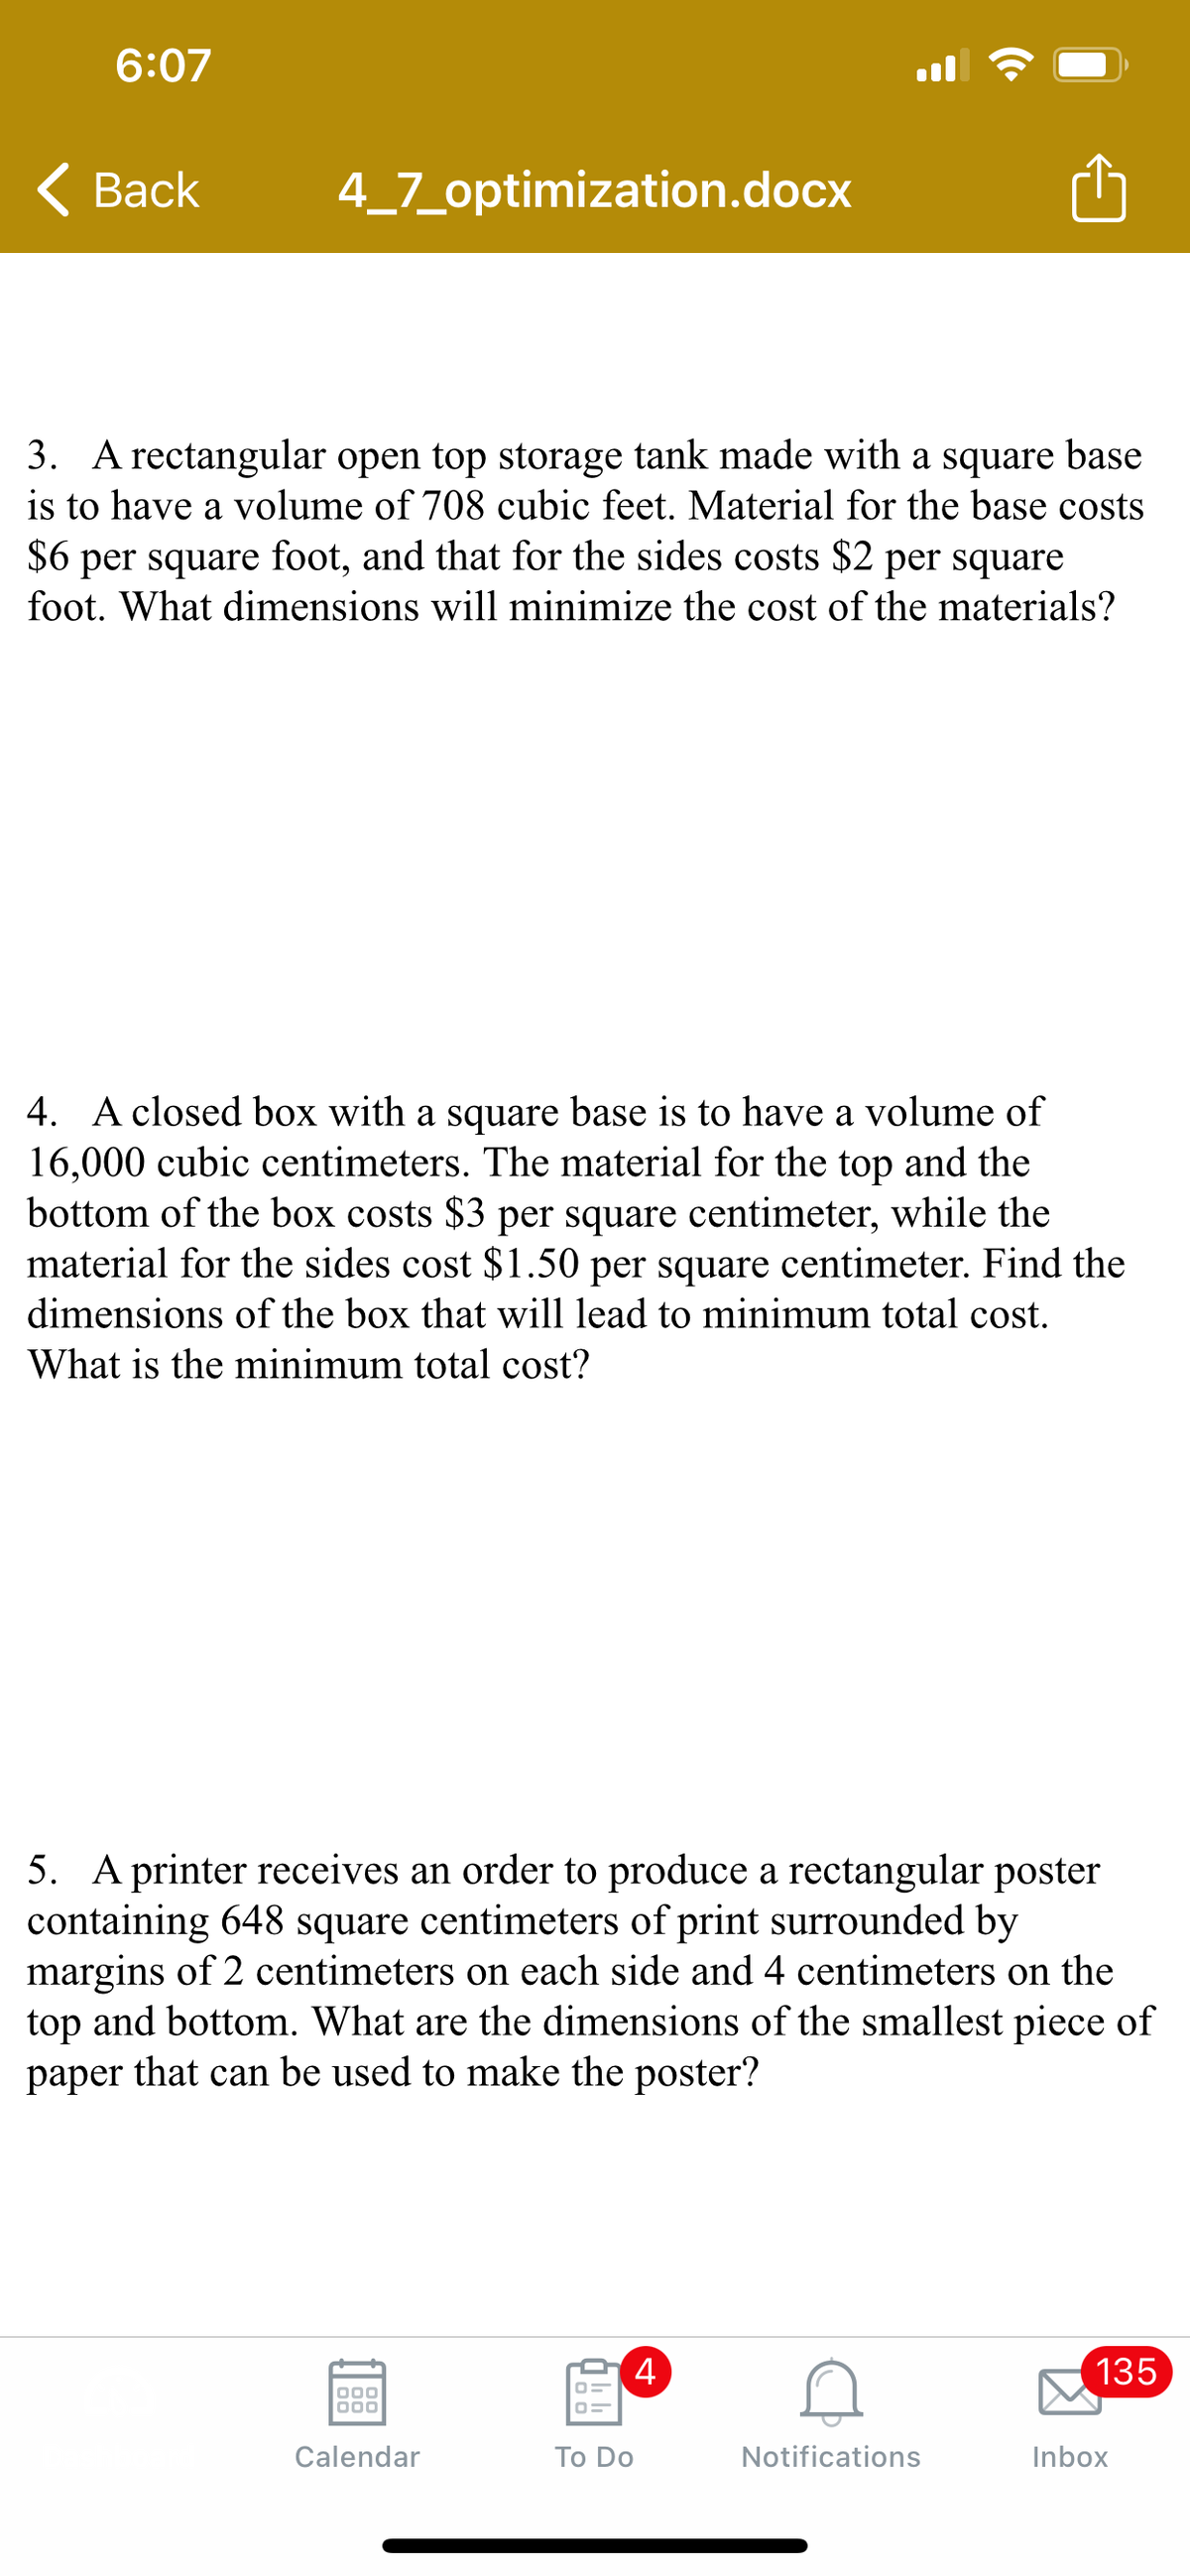 6:07
< Вack
4_7_optimization.docx
3. A rectangular open top storage tank made with a square base
is to have a volume of 708 cubic feet. Material for the base costs
$6 per square foot, and that for the sides costs $2 per square
foot. What dimensions will minimize the cost of the materials?
4. A closed box with a square base is to have a volume of
16,000 cubic centimeters. The material for the top and the
bottom of the box costs $3 per square centimeter, while the
material for the sides cost $1.50 per square centimeter. Find the
dimensions of the box that will lead to minimum total cost.
What is the minimum total cost?
5. A printer receives an order to produce a rectangular poster
containing 648 square centimeters of print surrounded by
margins of 2 centimeters on each side and 4 centimeters on the
top and bottom. What are the dimensions of the smallest piece of
paper that can be used to make the poster?
4
135
000
Calendar
Тo Do
Notifications
Inbox
